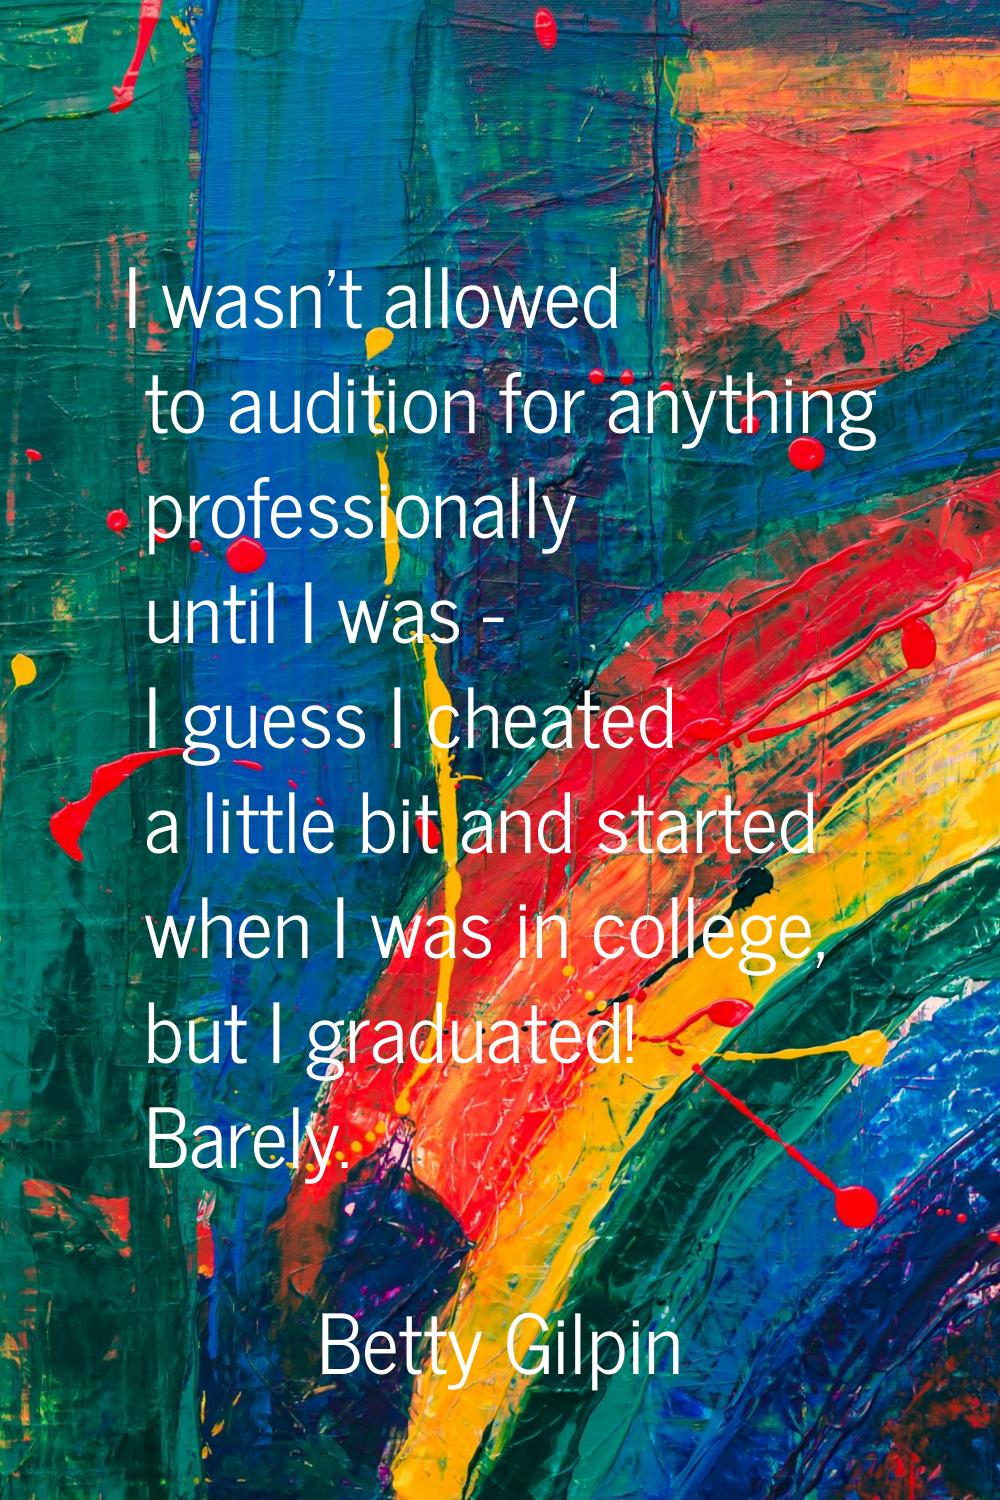 I wasn't allowed to audition for anything professionally until I was - I guess I cheated a little b